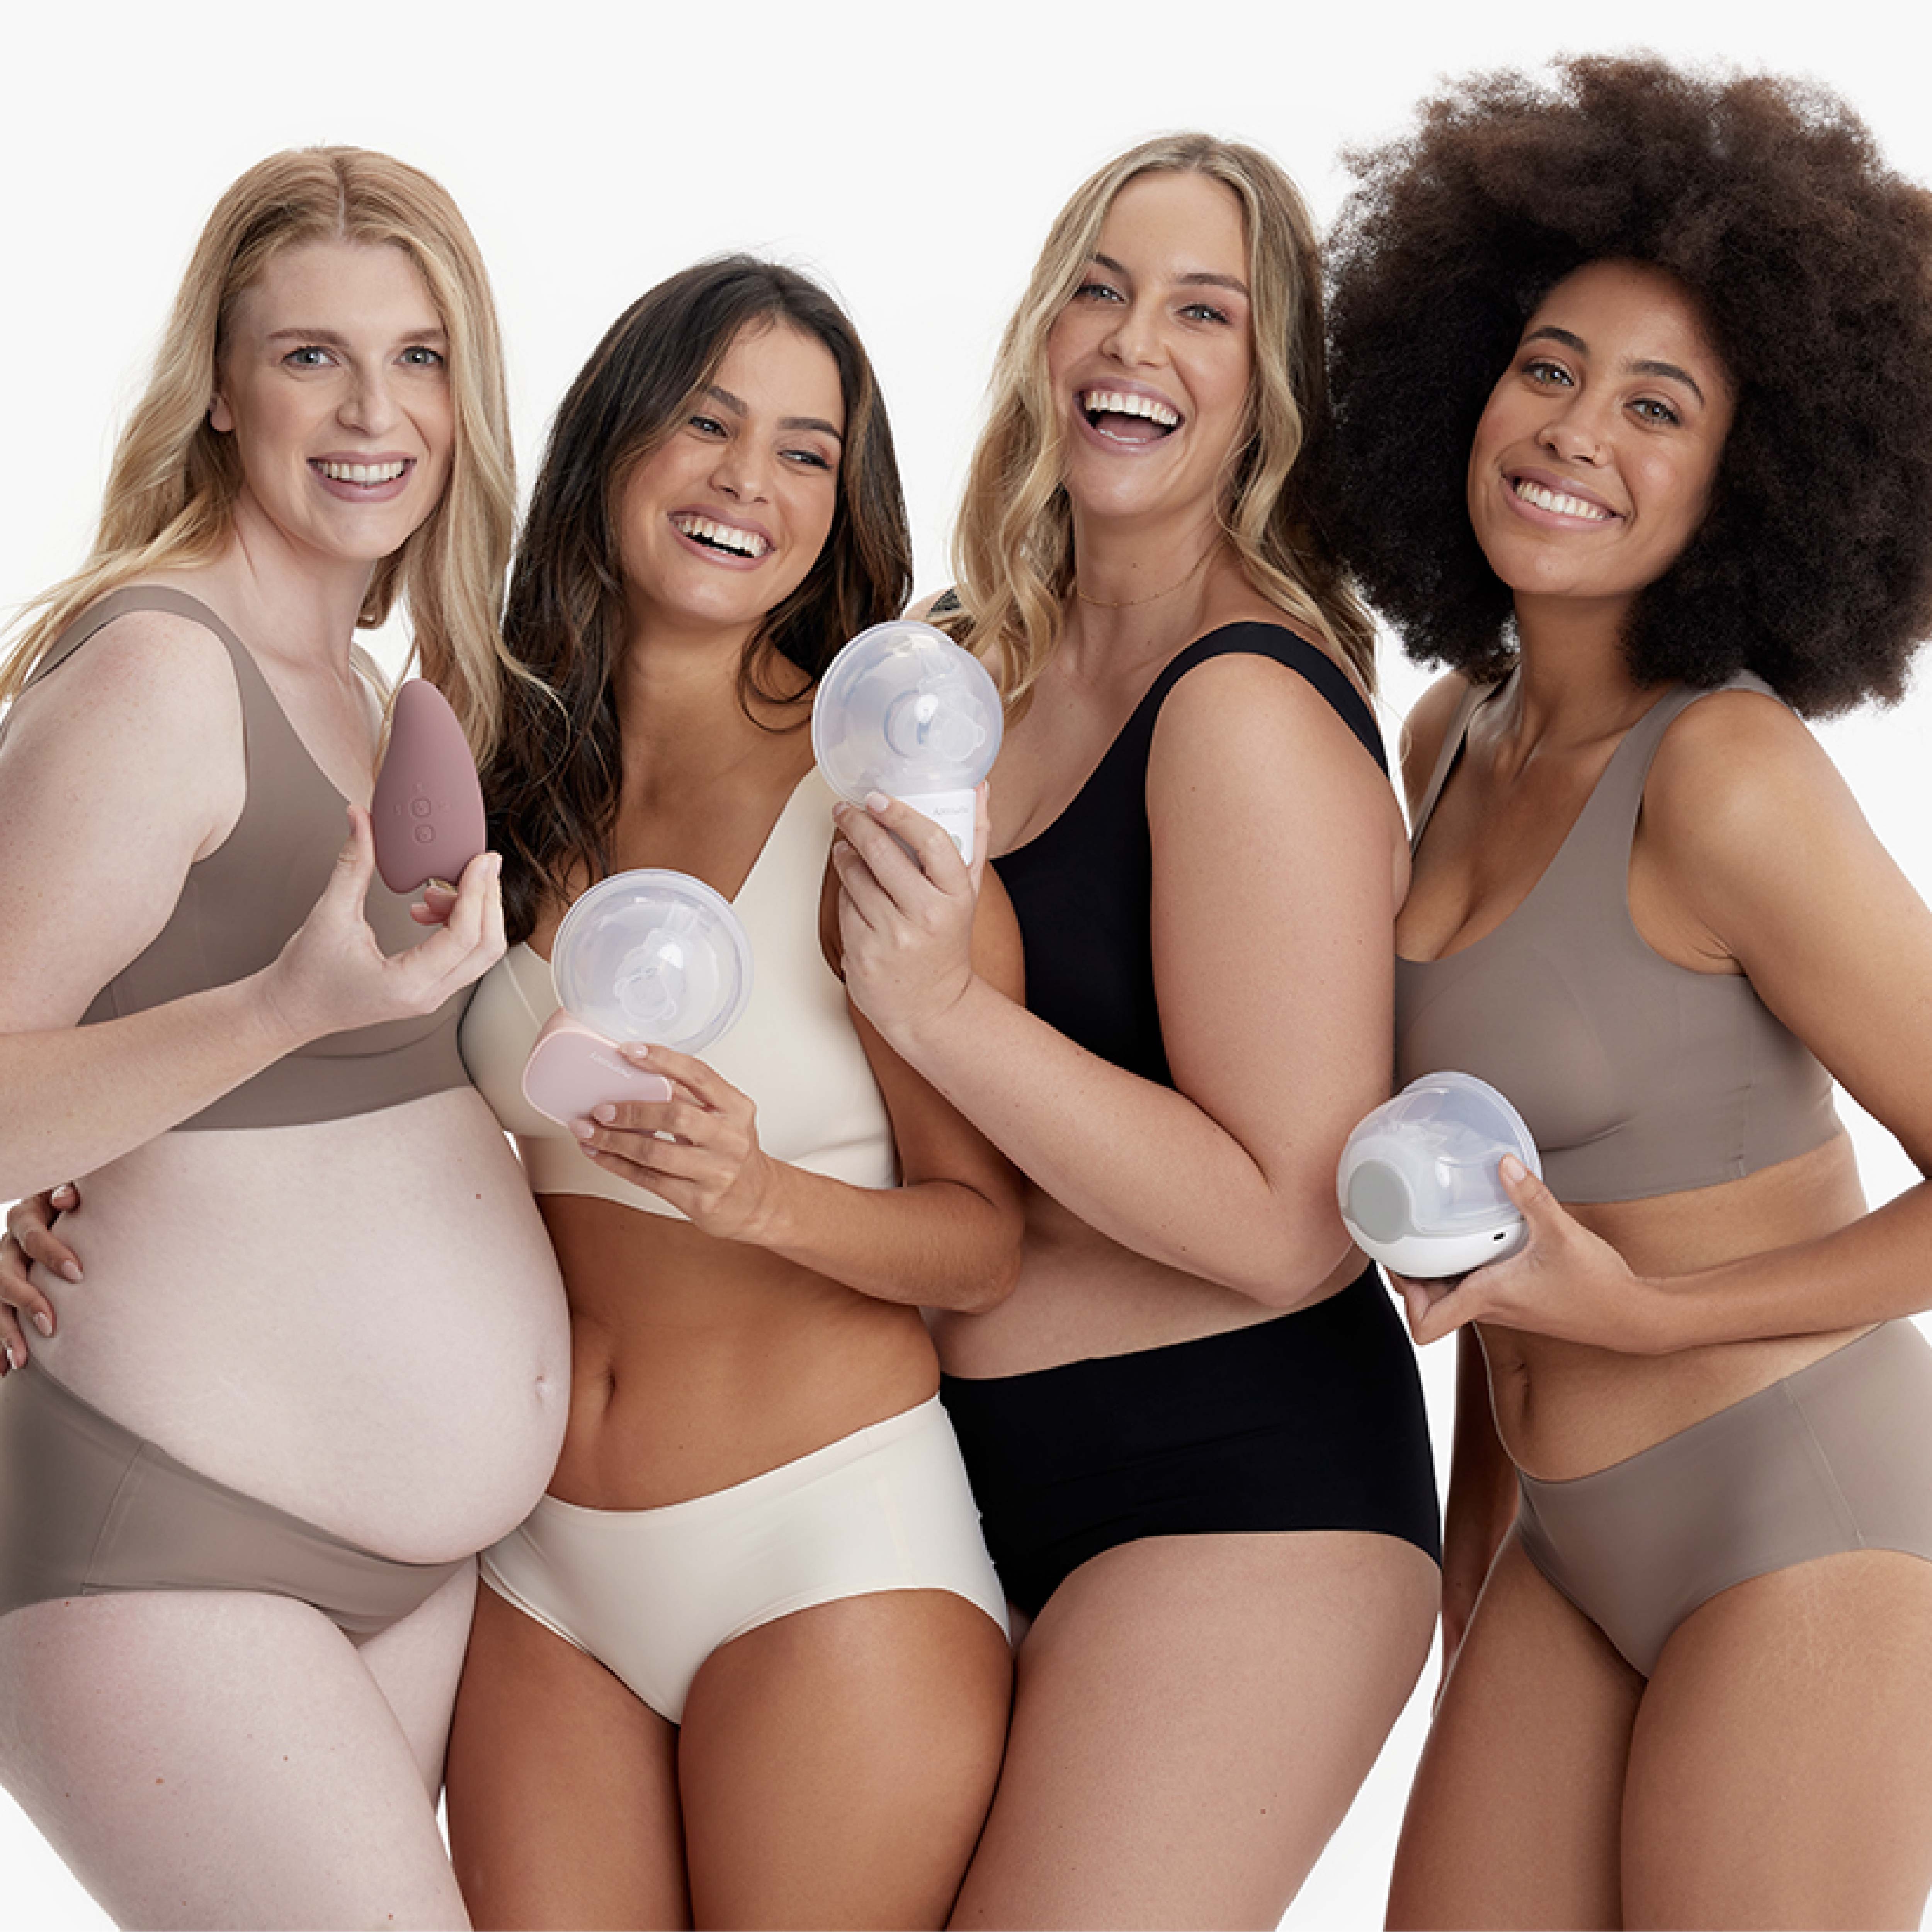  New Mothers Are Relying On This Innovative Brand for All Their Maternal Needs 